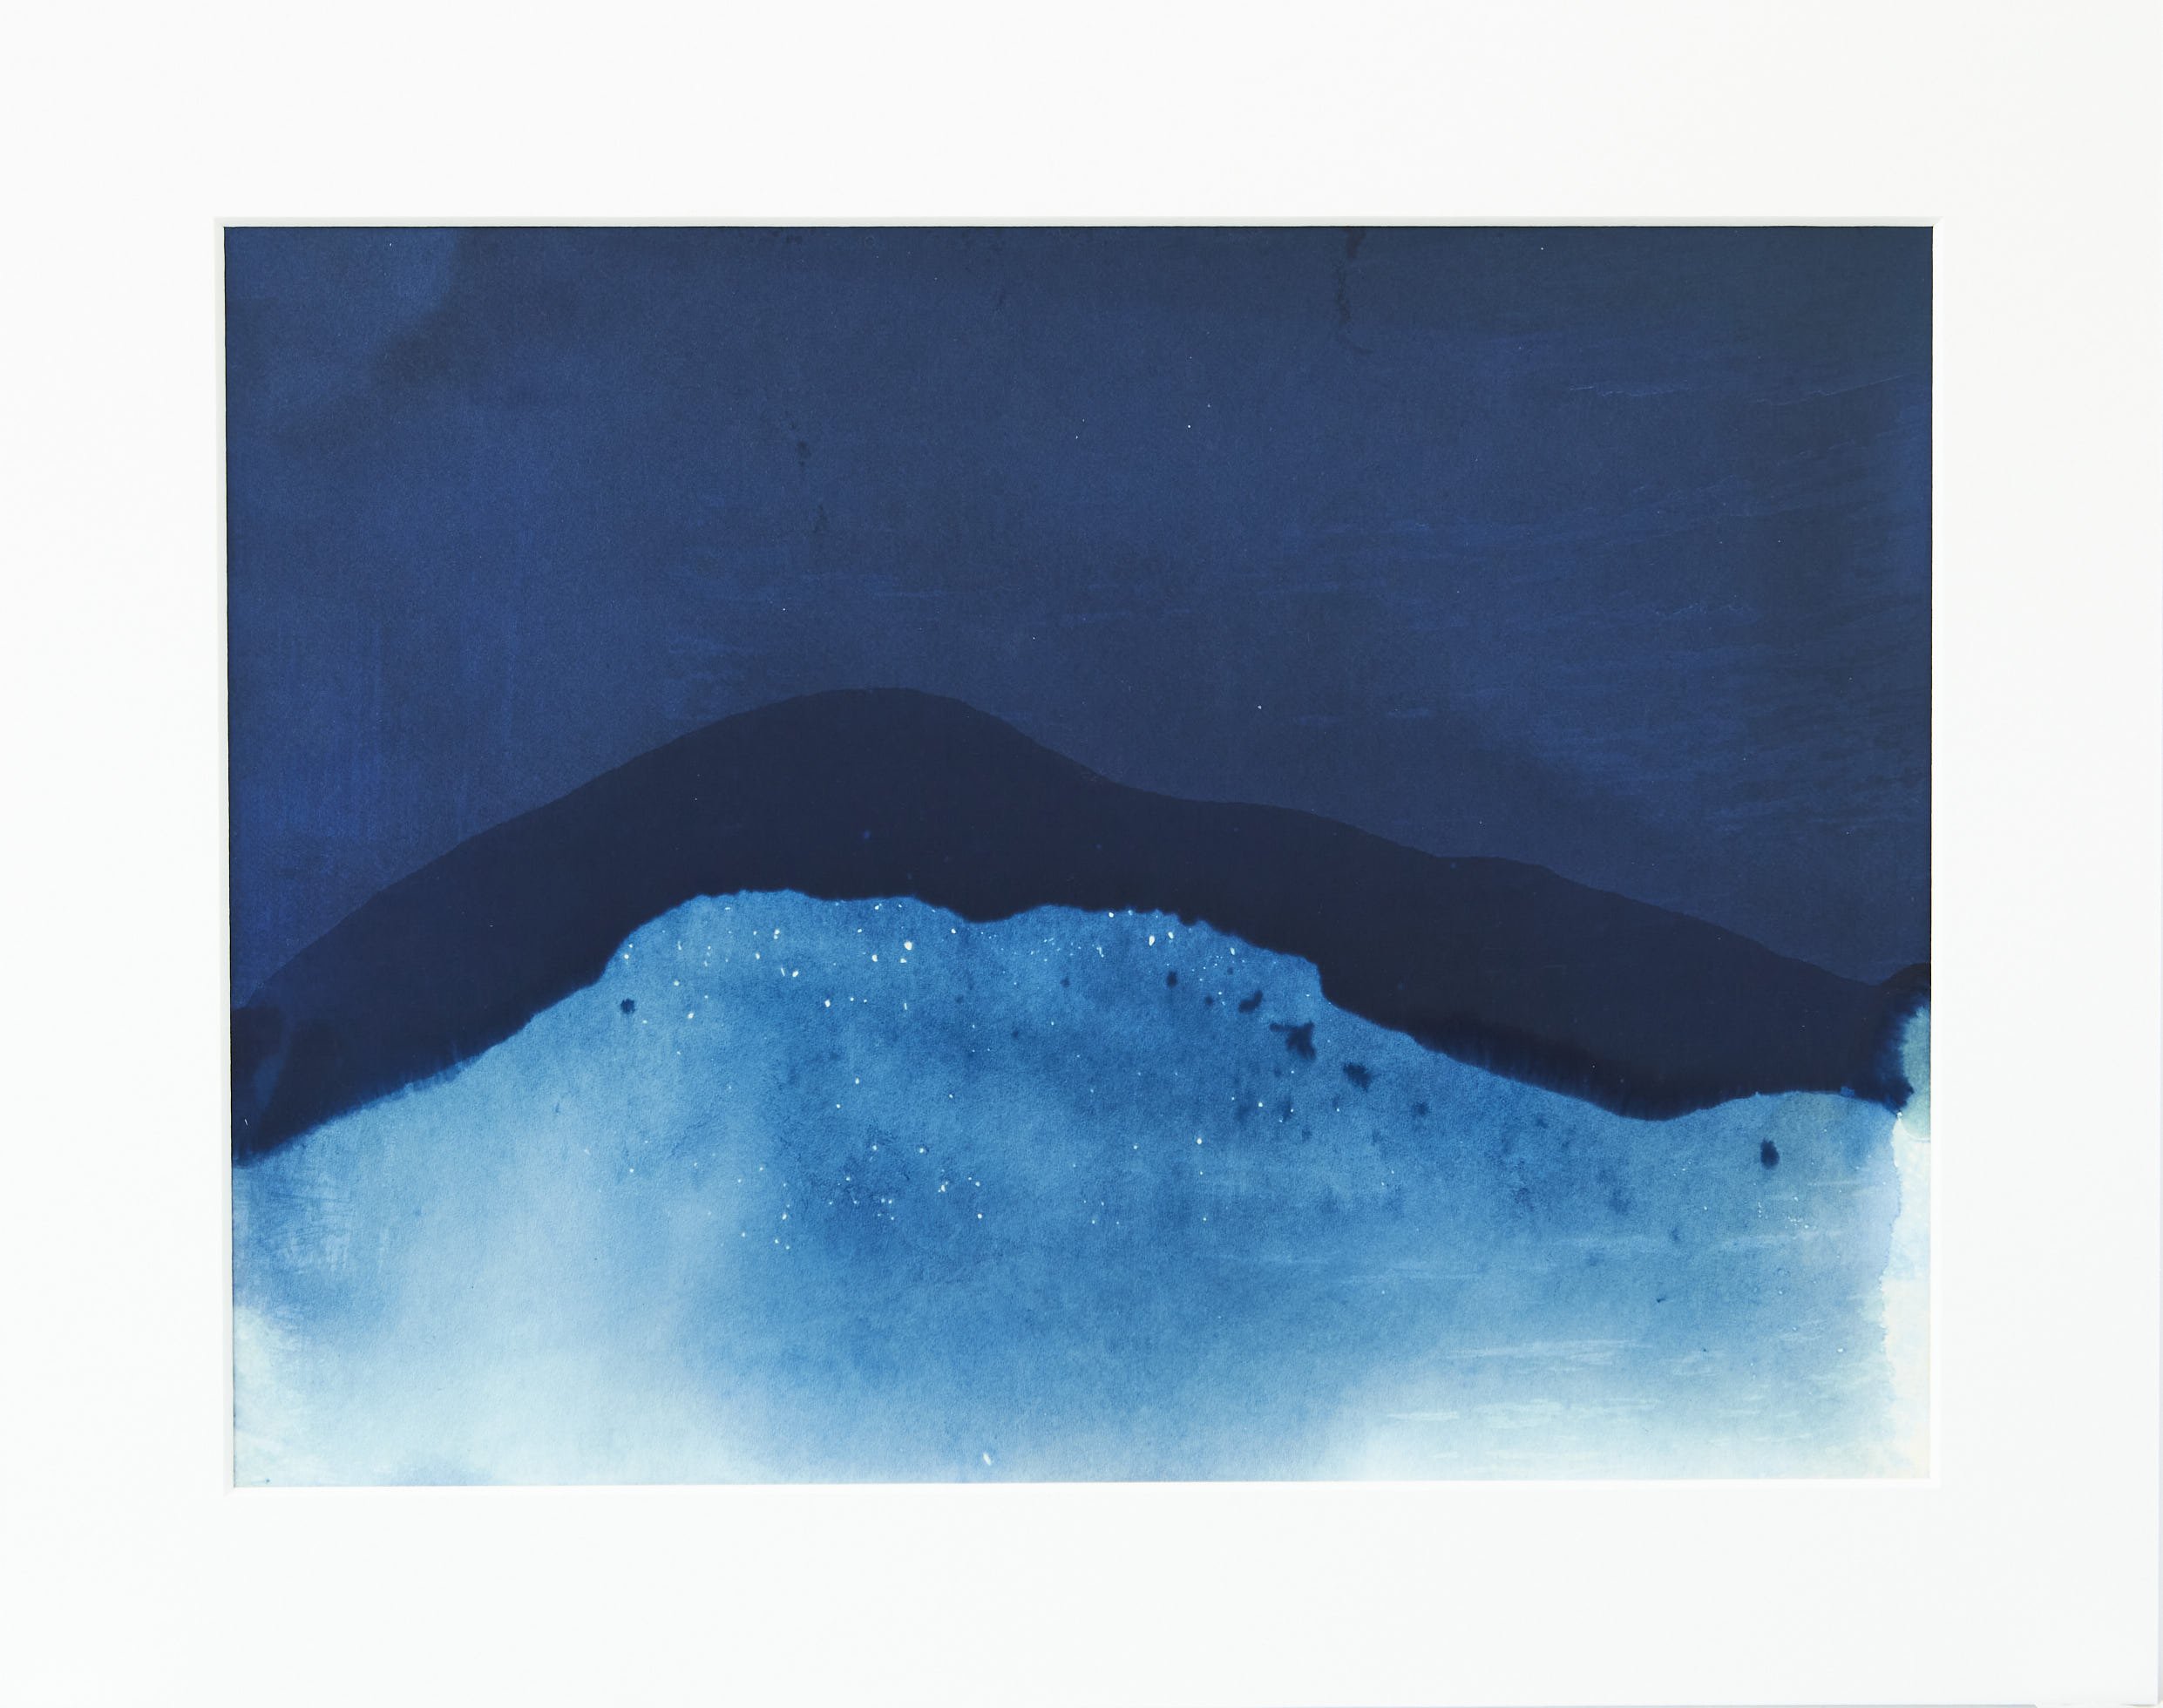  IL-Halford-2021-017 Cyanotype on paper  Print 9x12in  